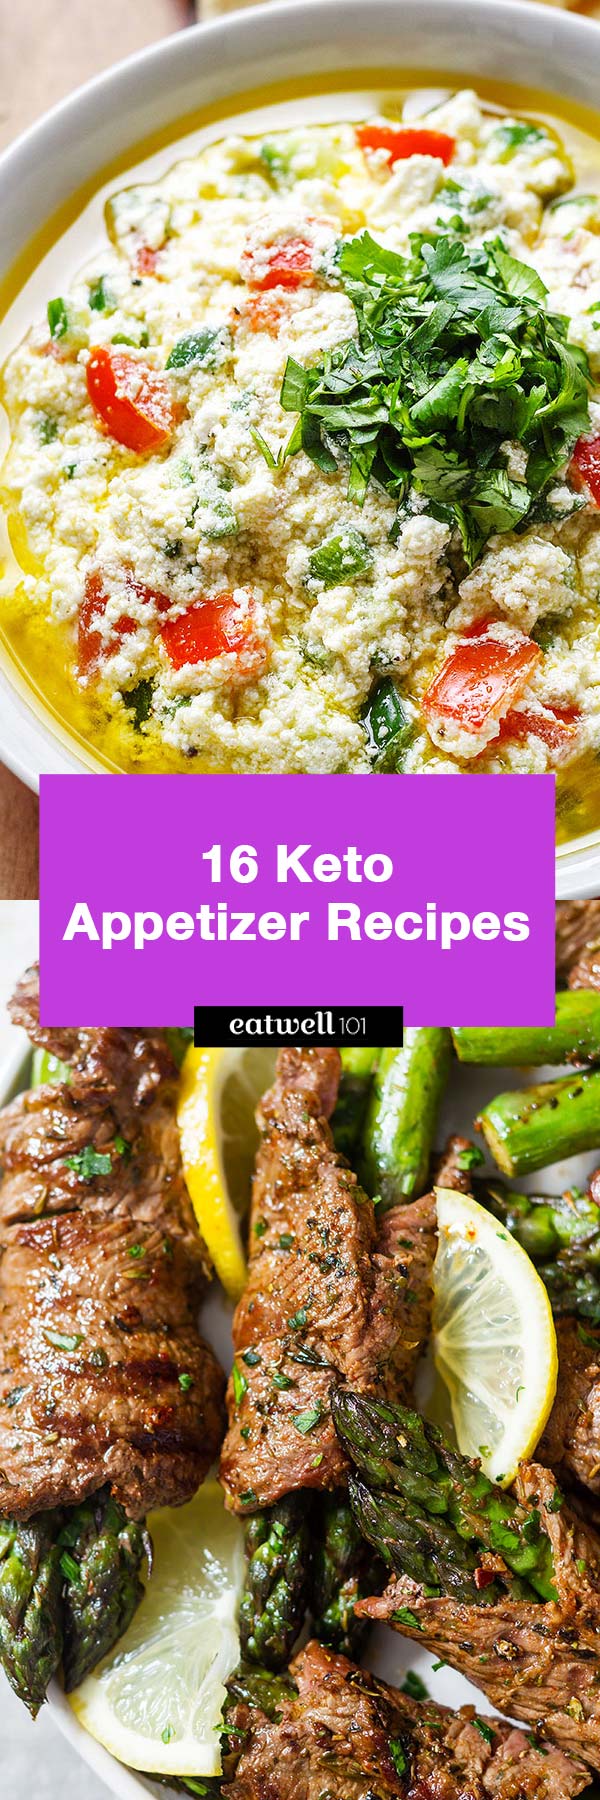 Keto Appetizer Recipes - These incredible keto appetizers are an easy way to enjoy the party and keep your diet on check!